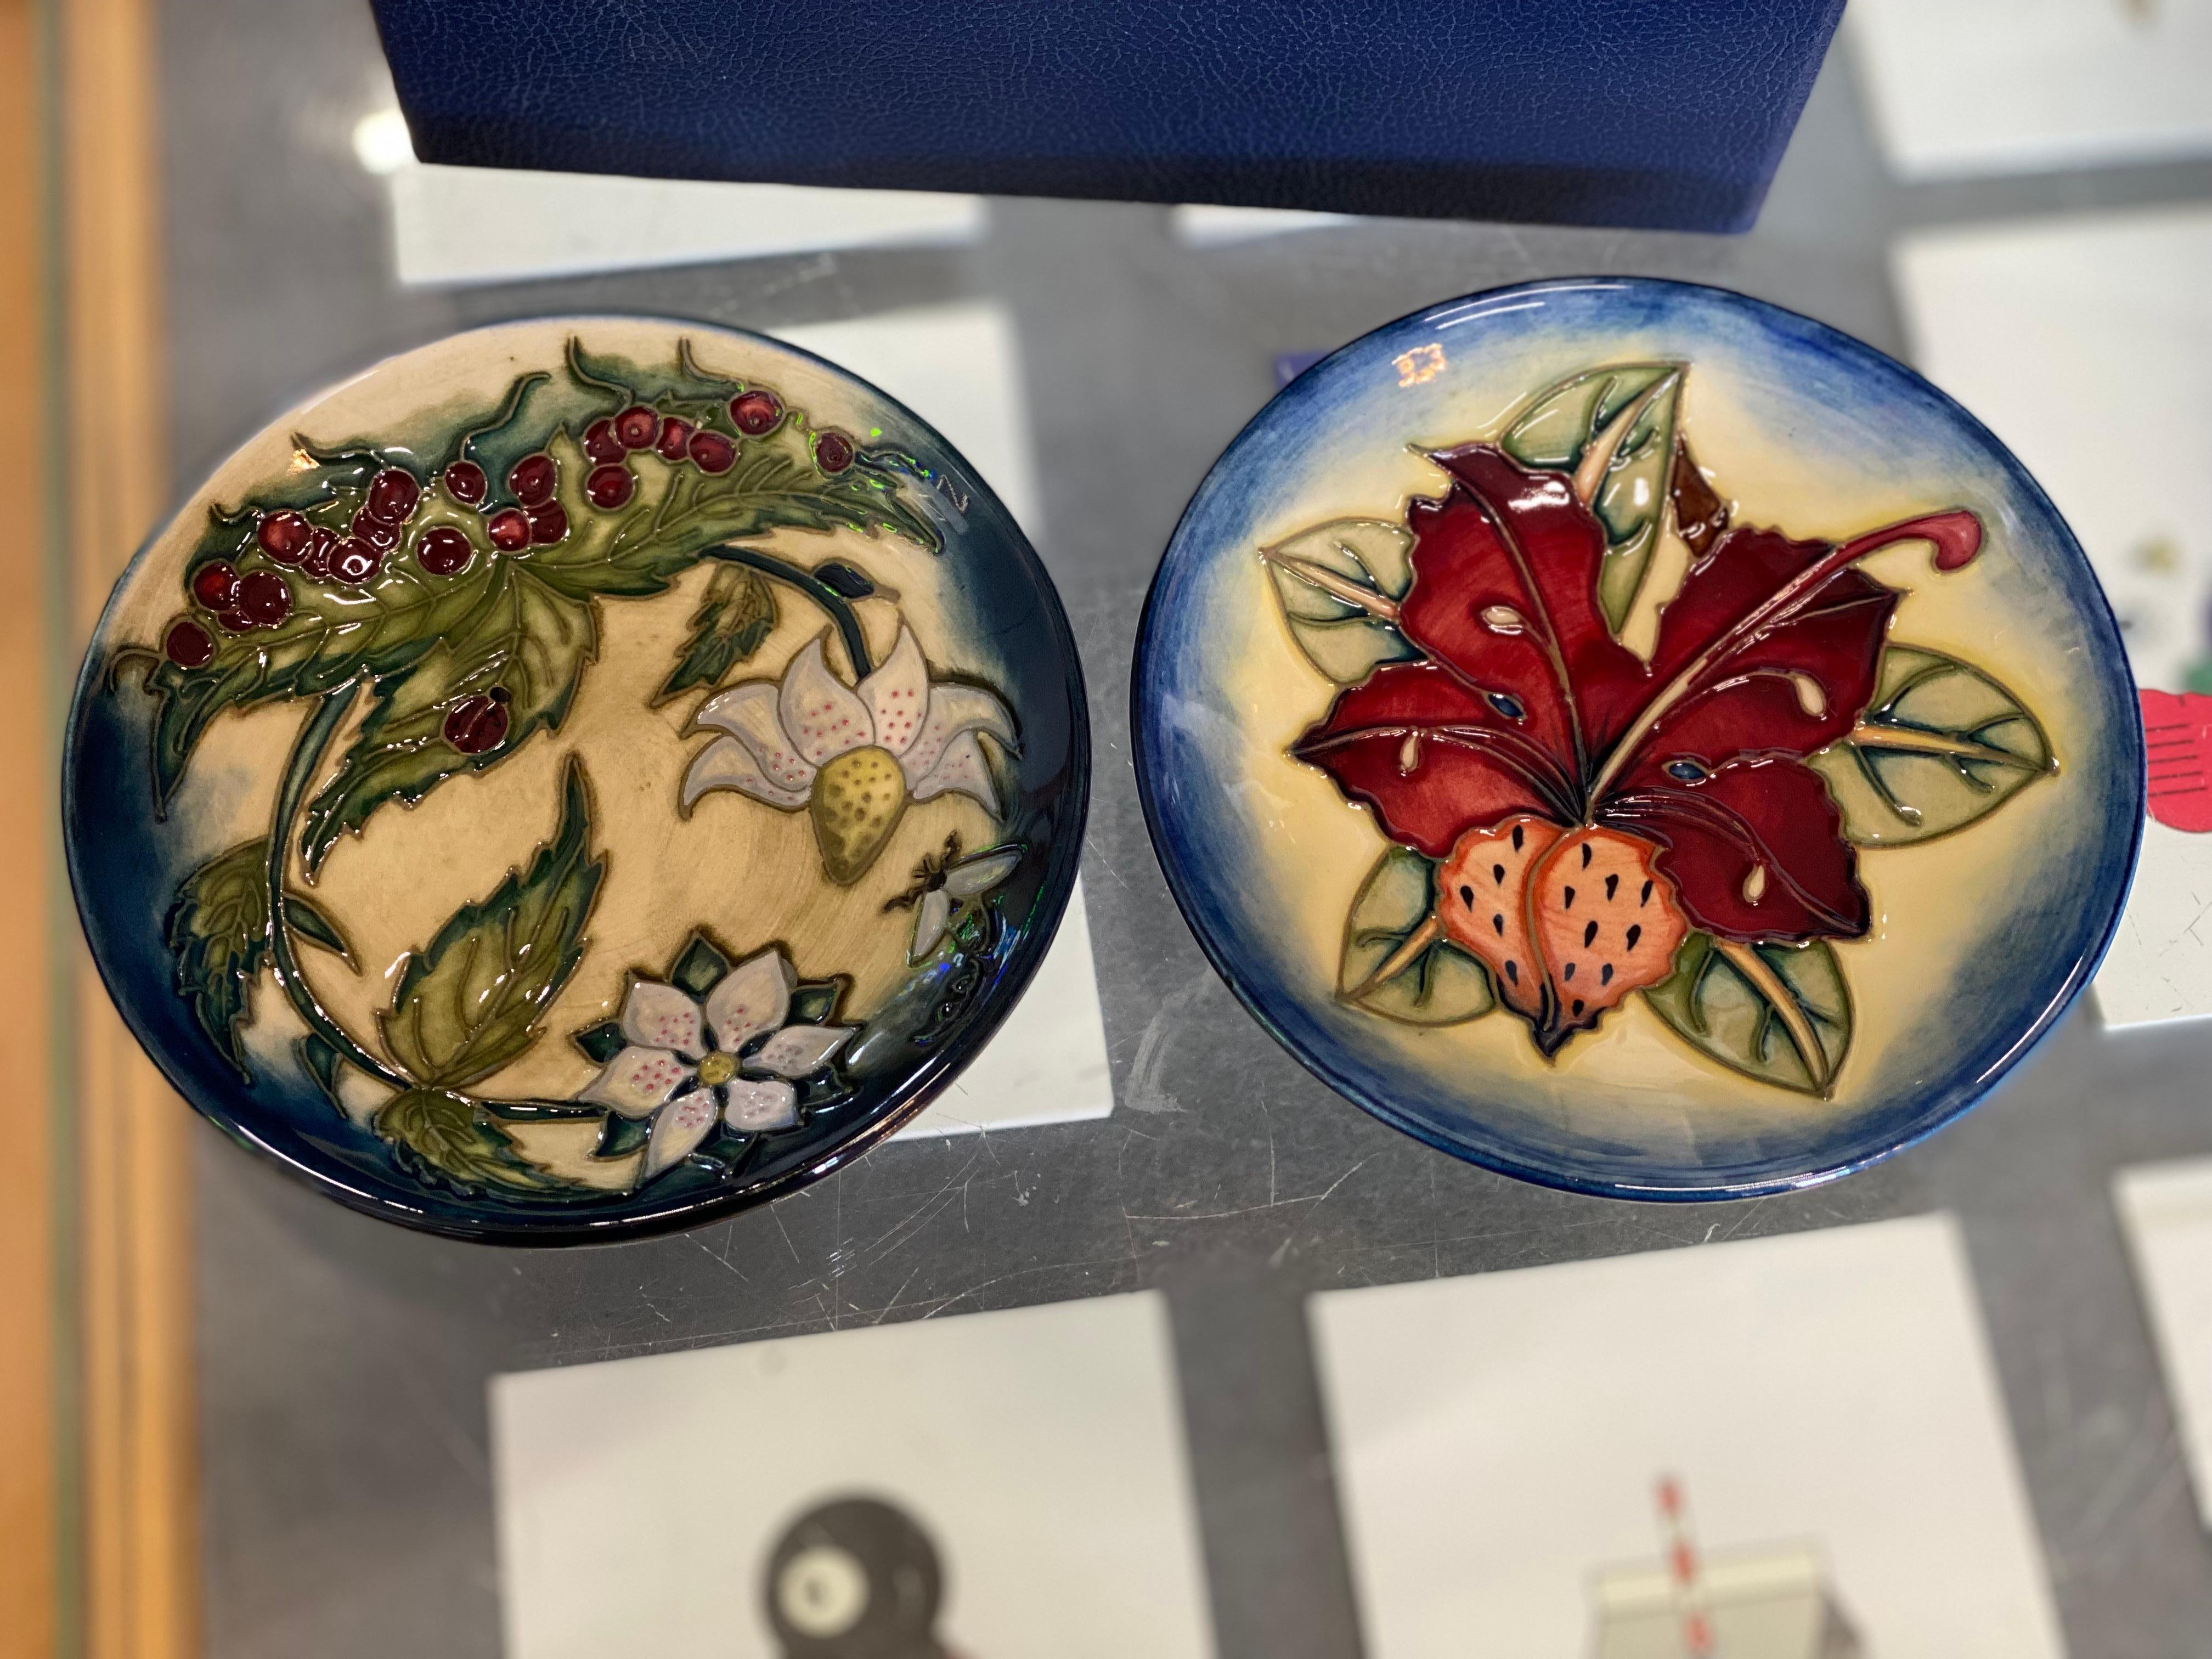 2 Small Moorcroft ceramic plates, the so-called 780/4 trays. The ceramic plates have two different floral designs, are hand painted and glazed to a high gloss. Two great collector's items, delightful hall trays for personal treasures and a touch of